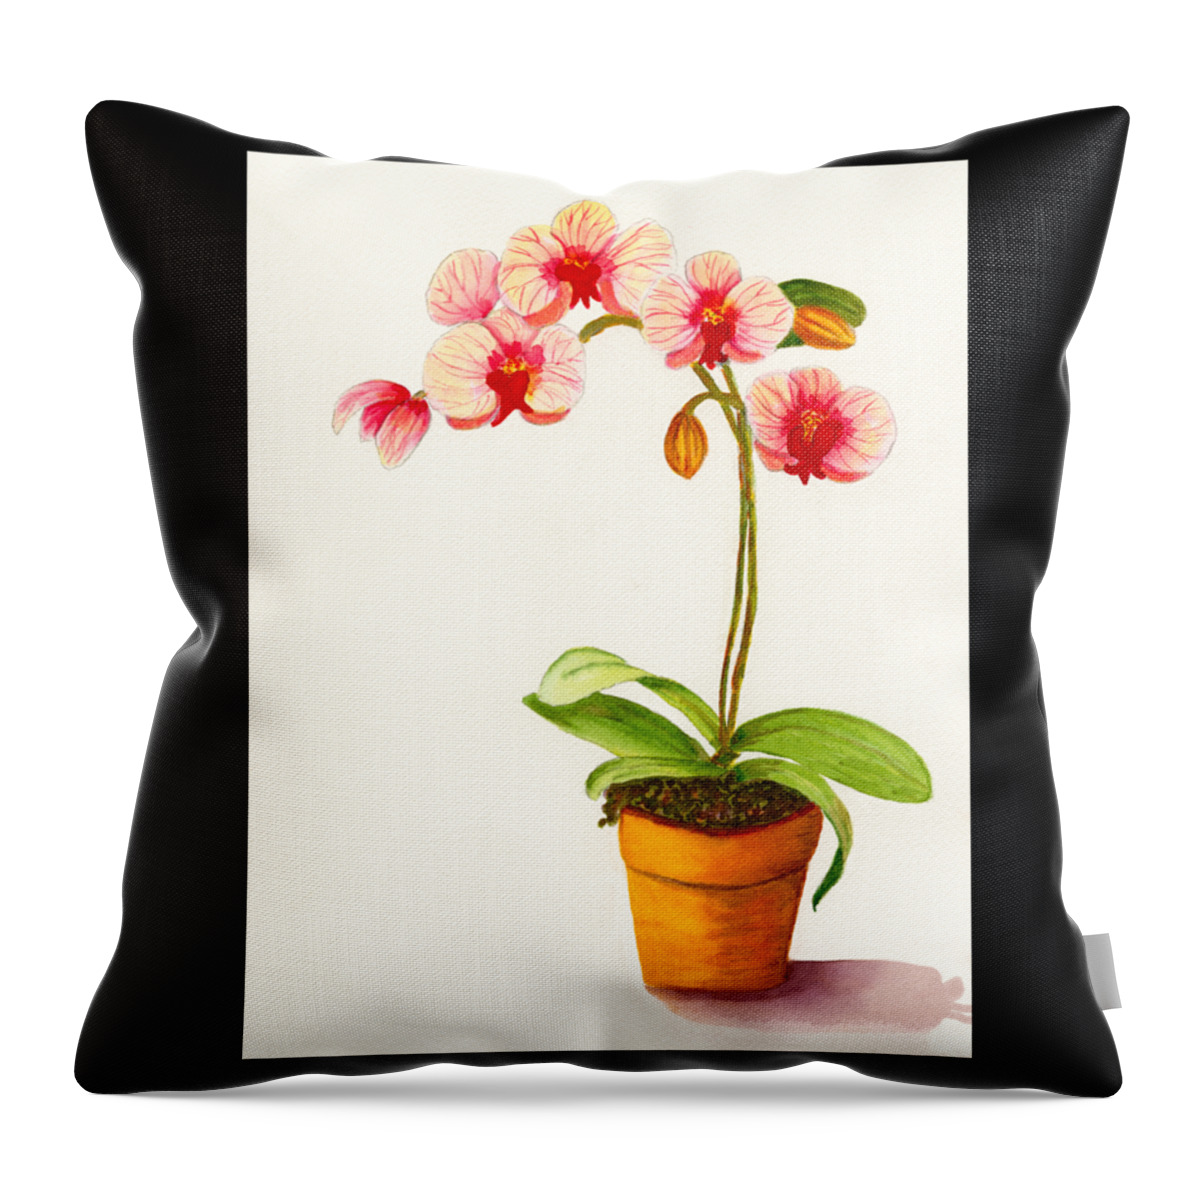 Flower Throw Pillow featuring the painting Potted Red And White Phalaenopsis Orchid by Deborah League